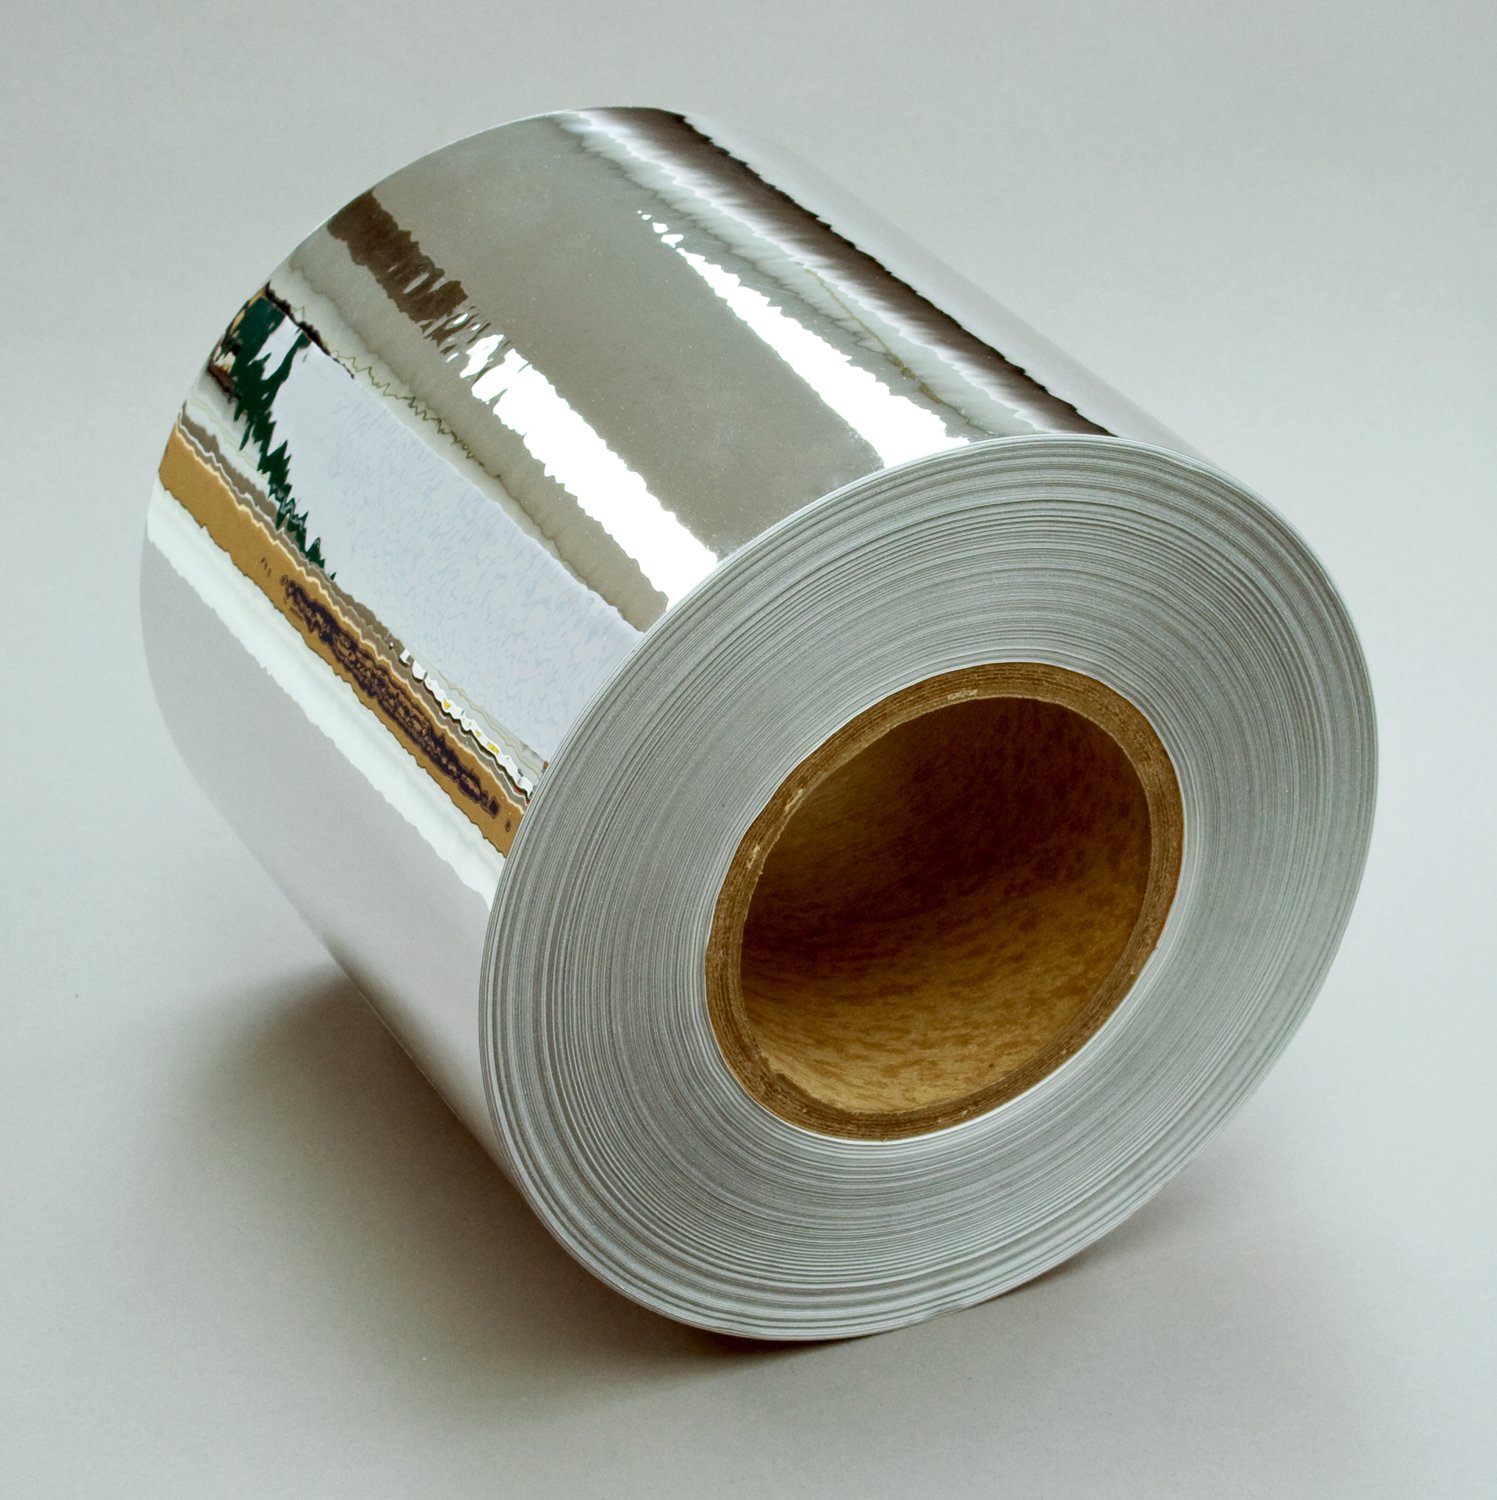 7100012880 - 3M Sheet and Screen Label Material 7214SA, Brushed Silver Polyester,
Roll, Config